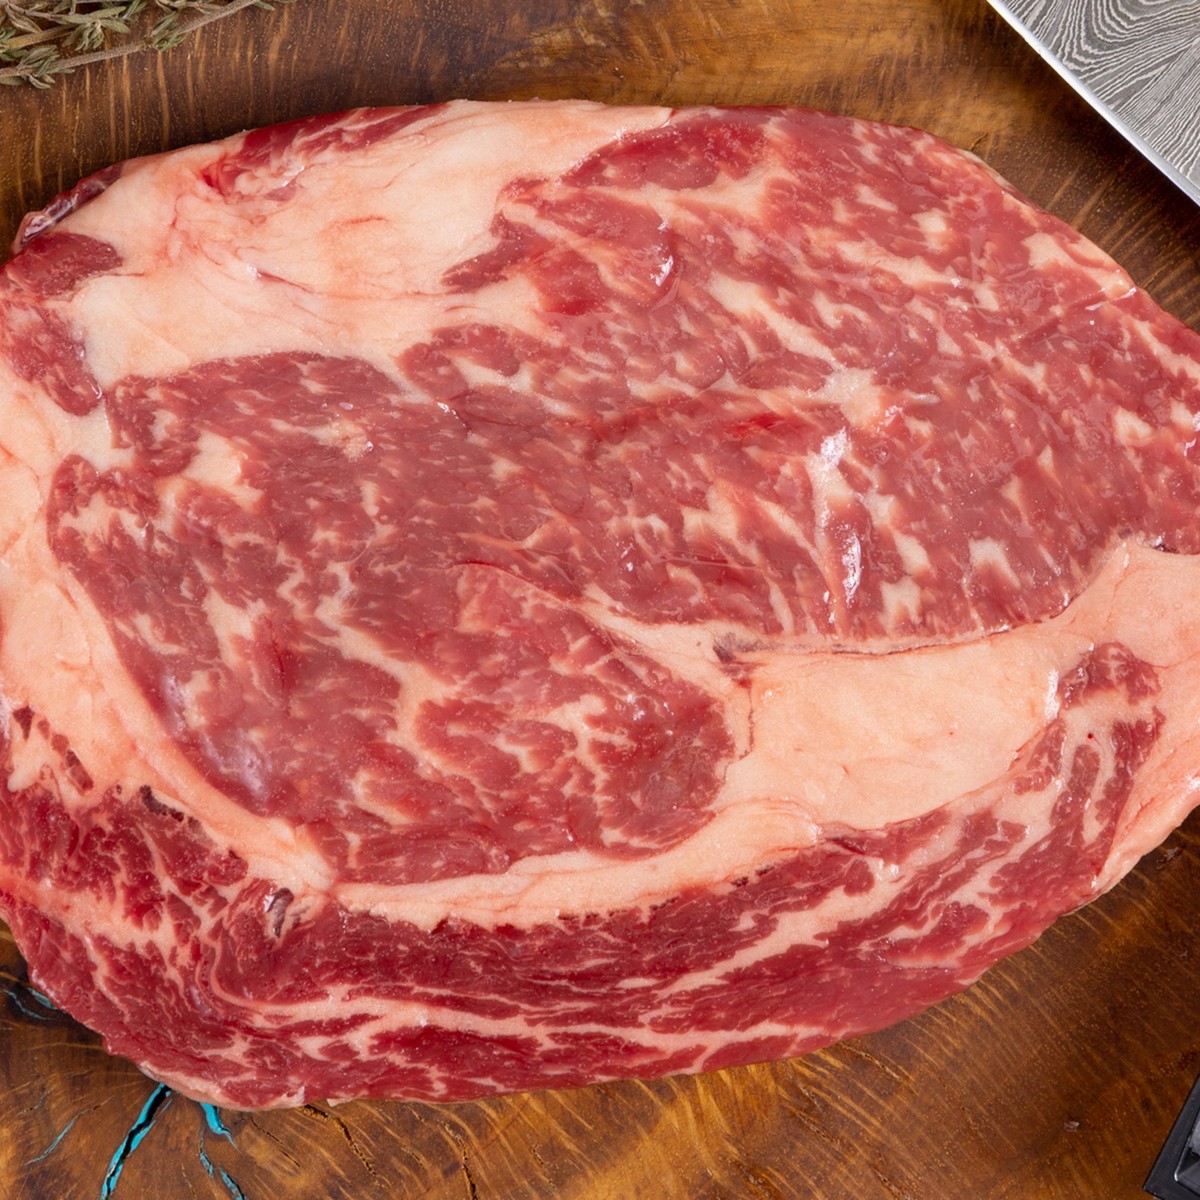 City Meat Market - Stop in and get your WHOLE UNGRADED RIBEYES for ONLY  $7.99/lb. This is looking like the “bottom” for price this year.